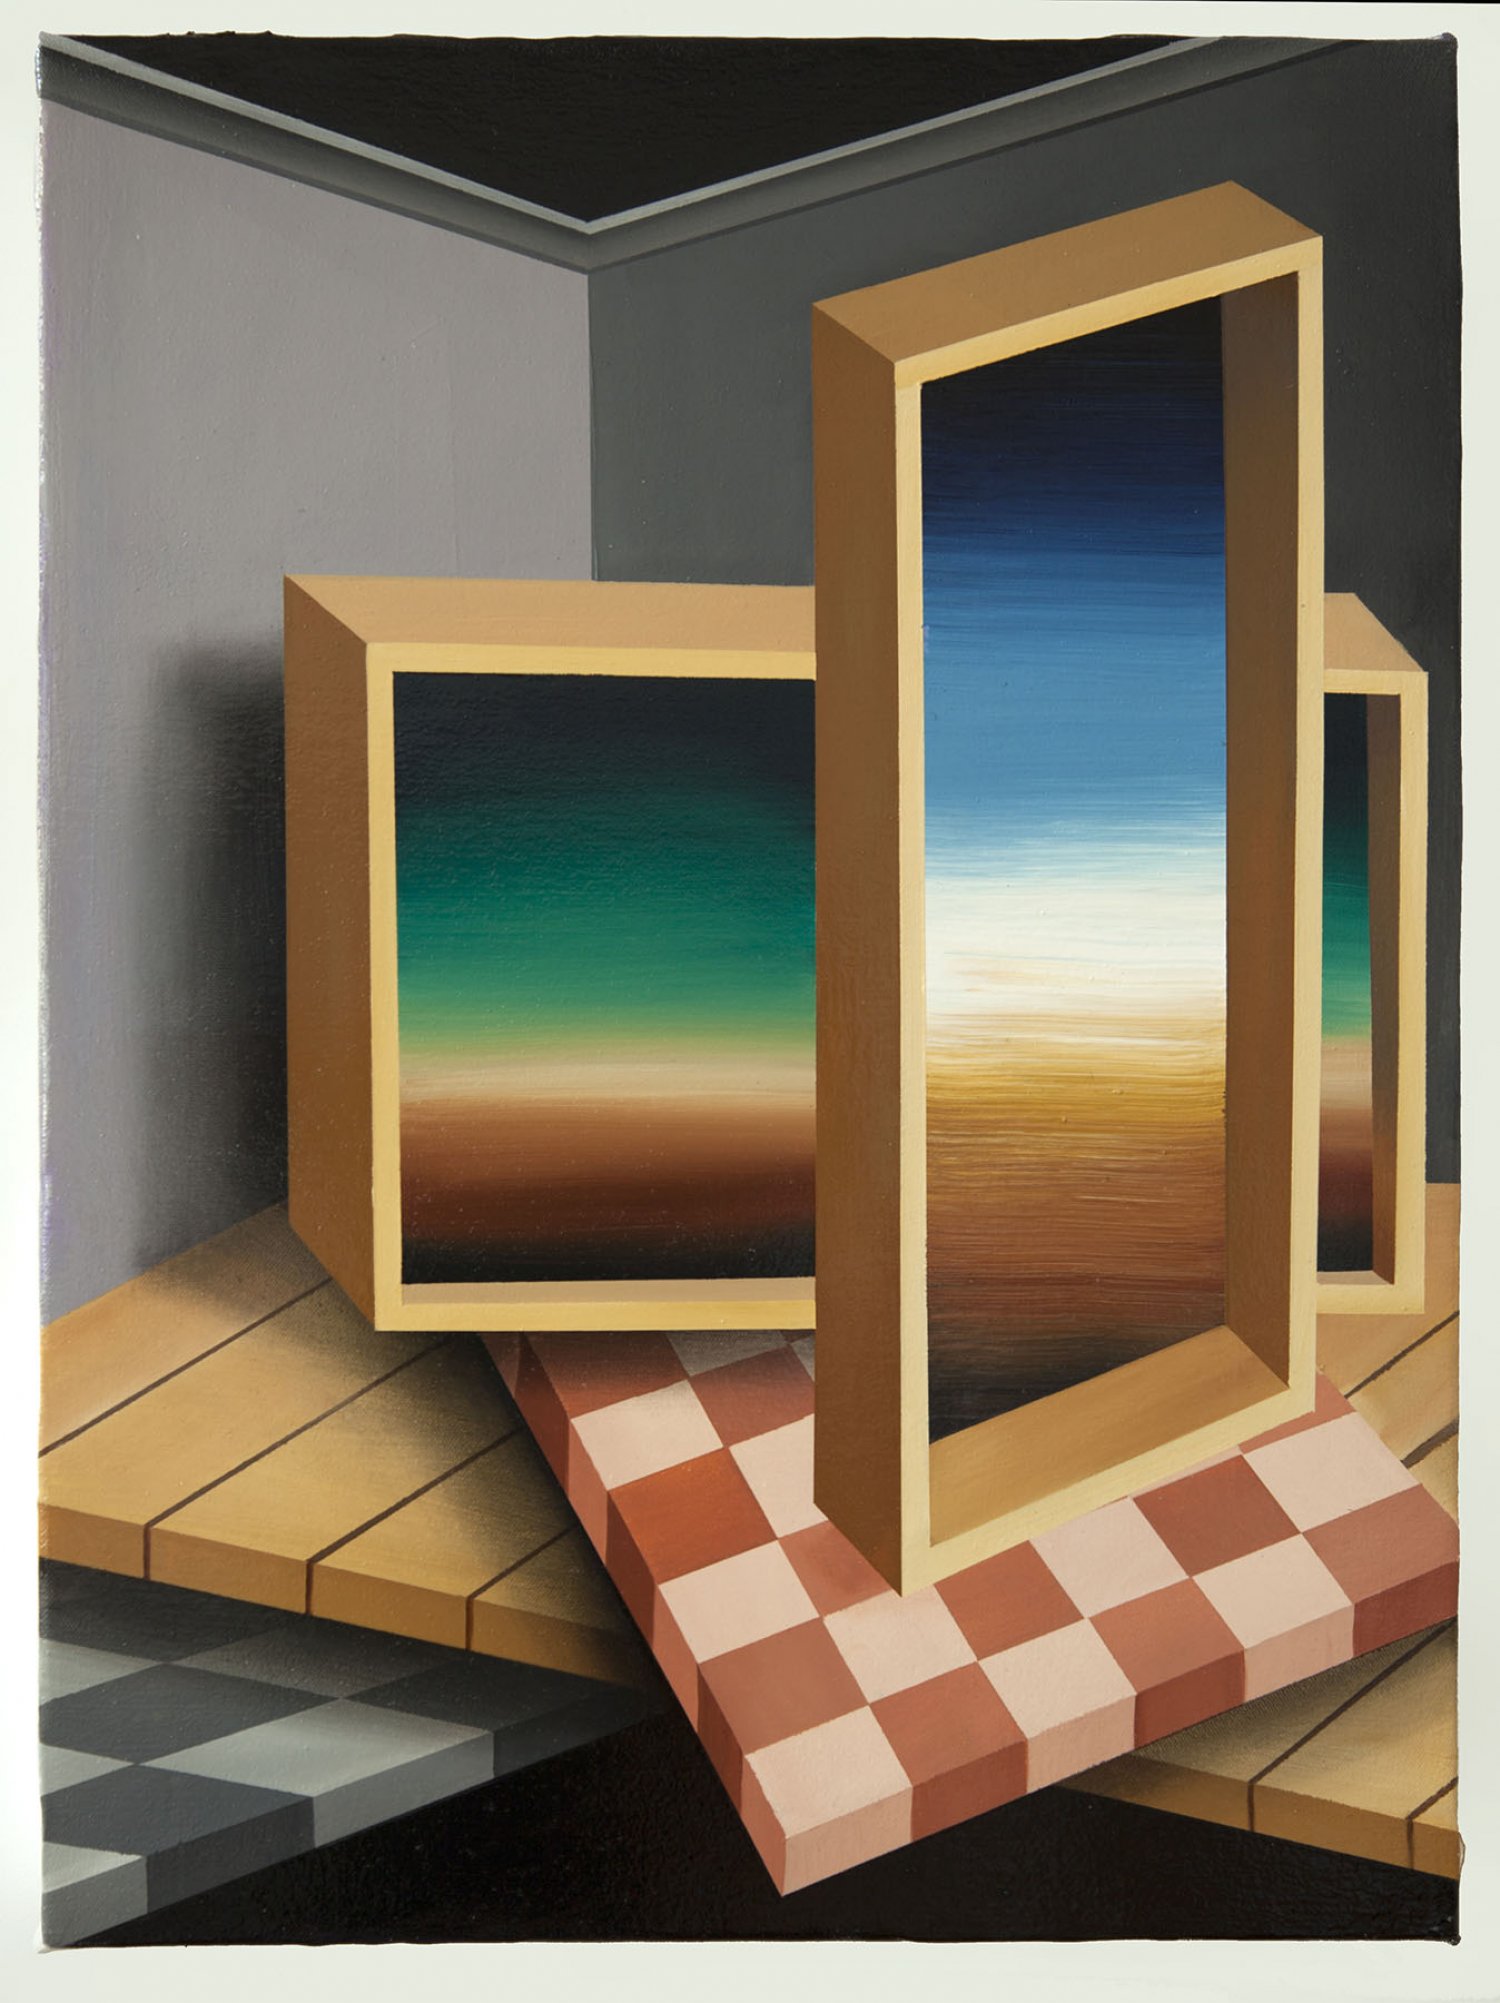 Peter Daverington, Two objects arranged in a room